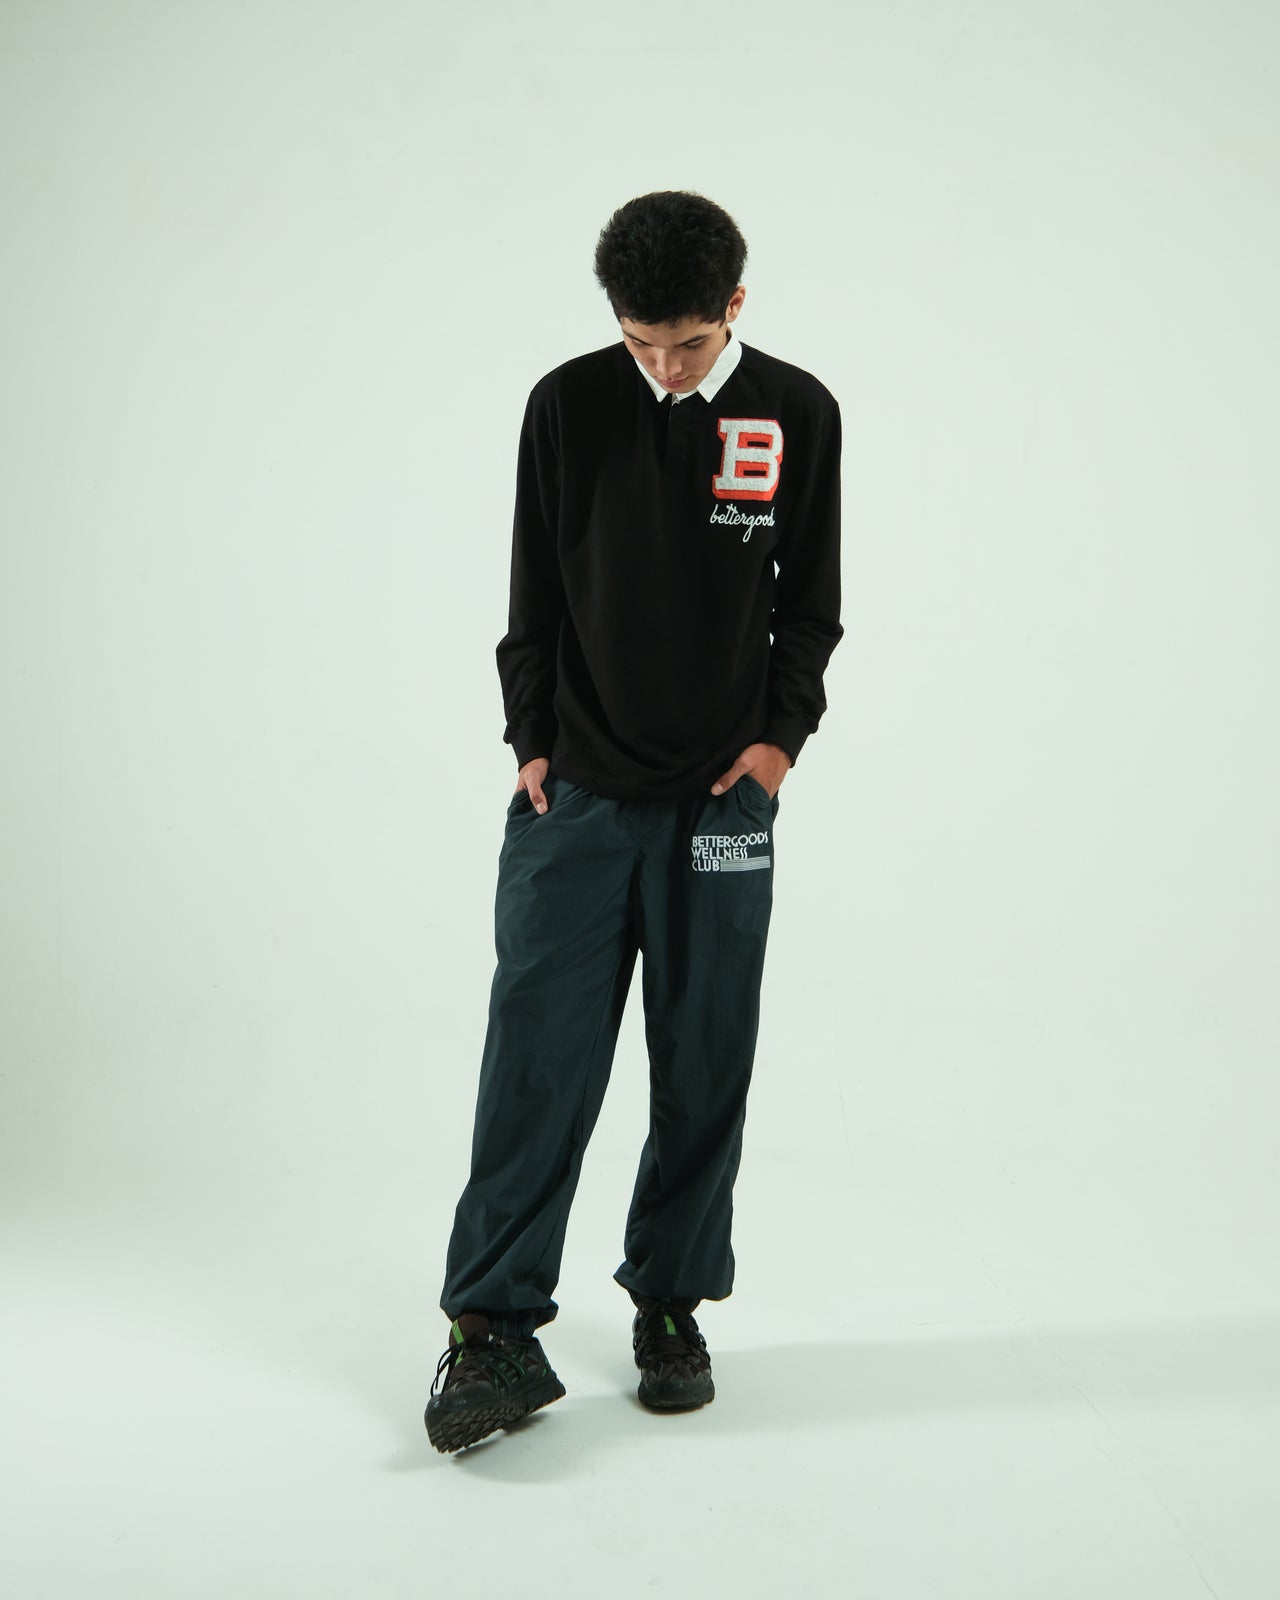 Chenille Rugby Shirt Ls Black